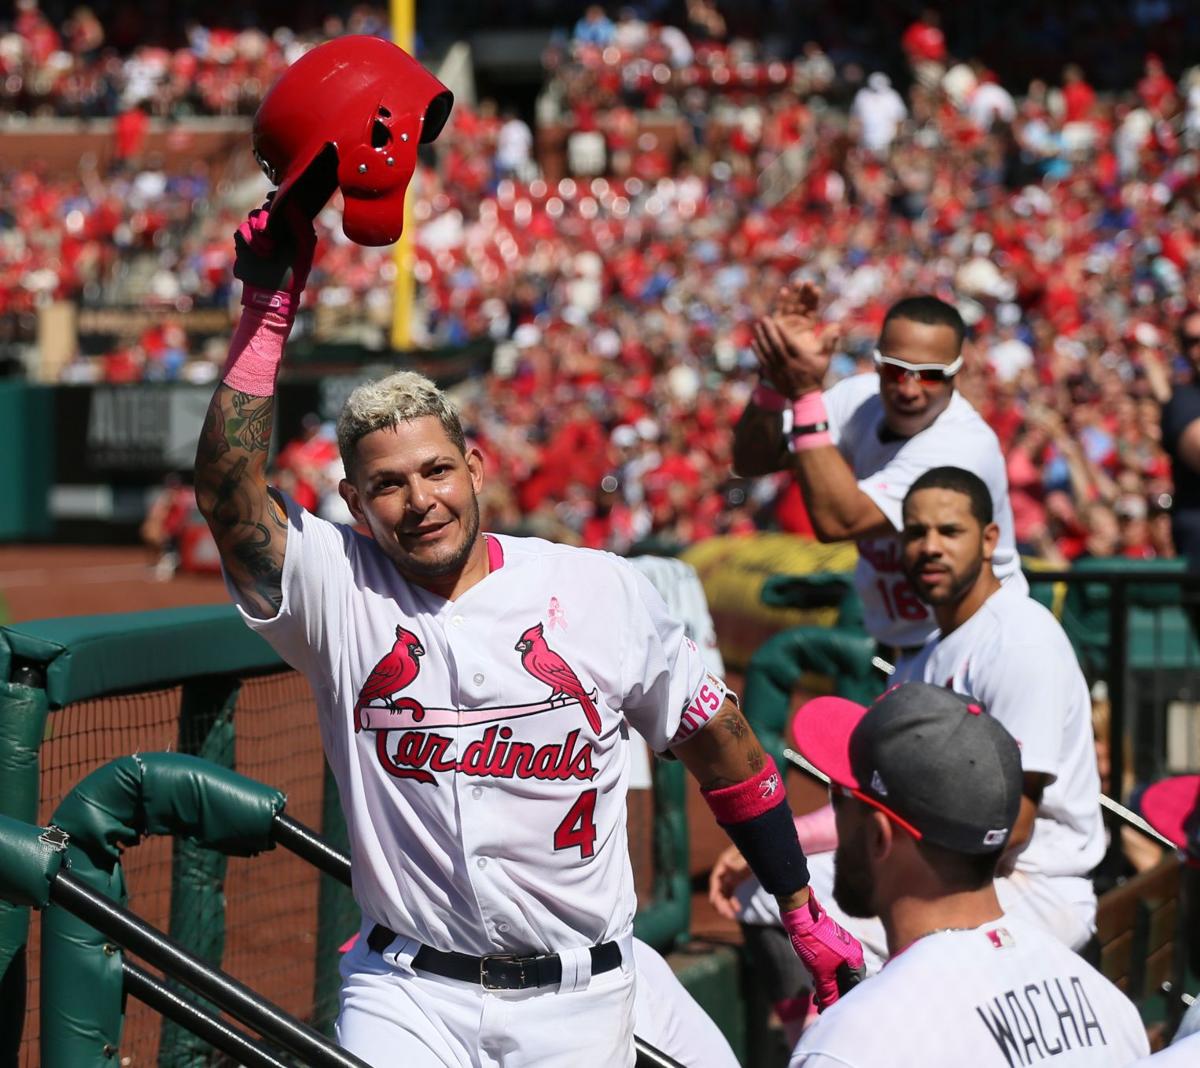 Photos: Cards shut out Cubs to win series | St. Louis Cardinals | www.waterandnature.org